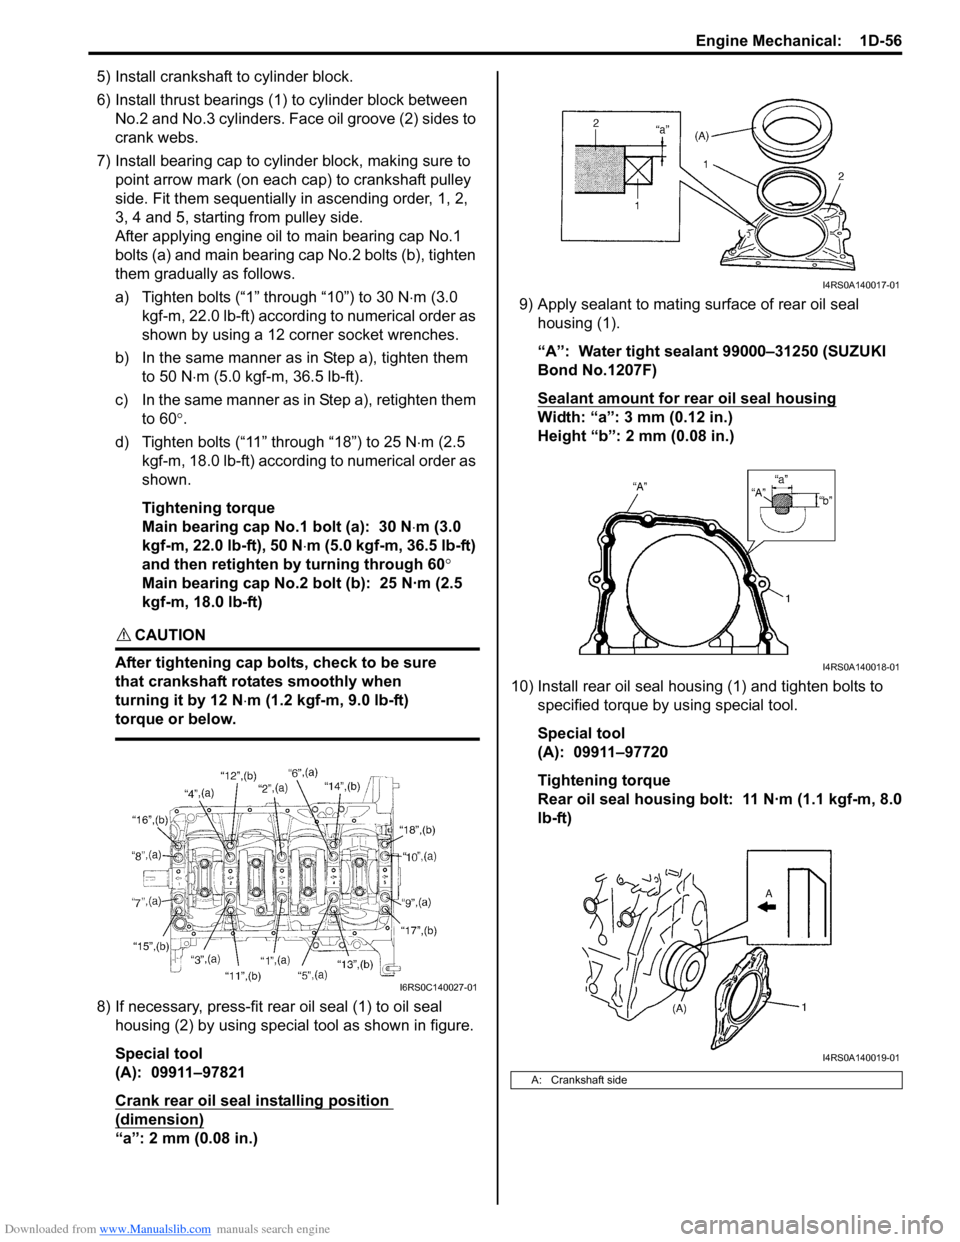 SUZUKI SWIFT 2005 2.G Service Workshop Manual Downloaded from www.Manualslib.com manuals search engine Engine Mechanical:  1D-56
5) Install crankshaft to cylinder block.
6) Install thrust bearings (1) to cylinder block between No.2 and No.3 cylin